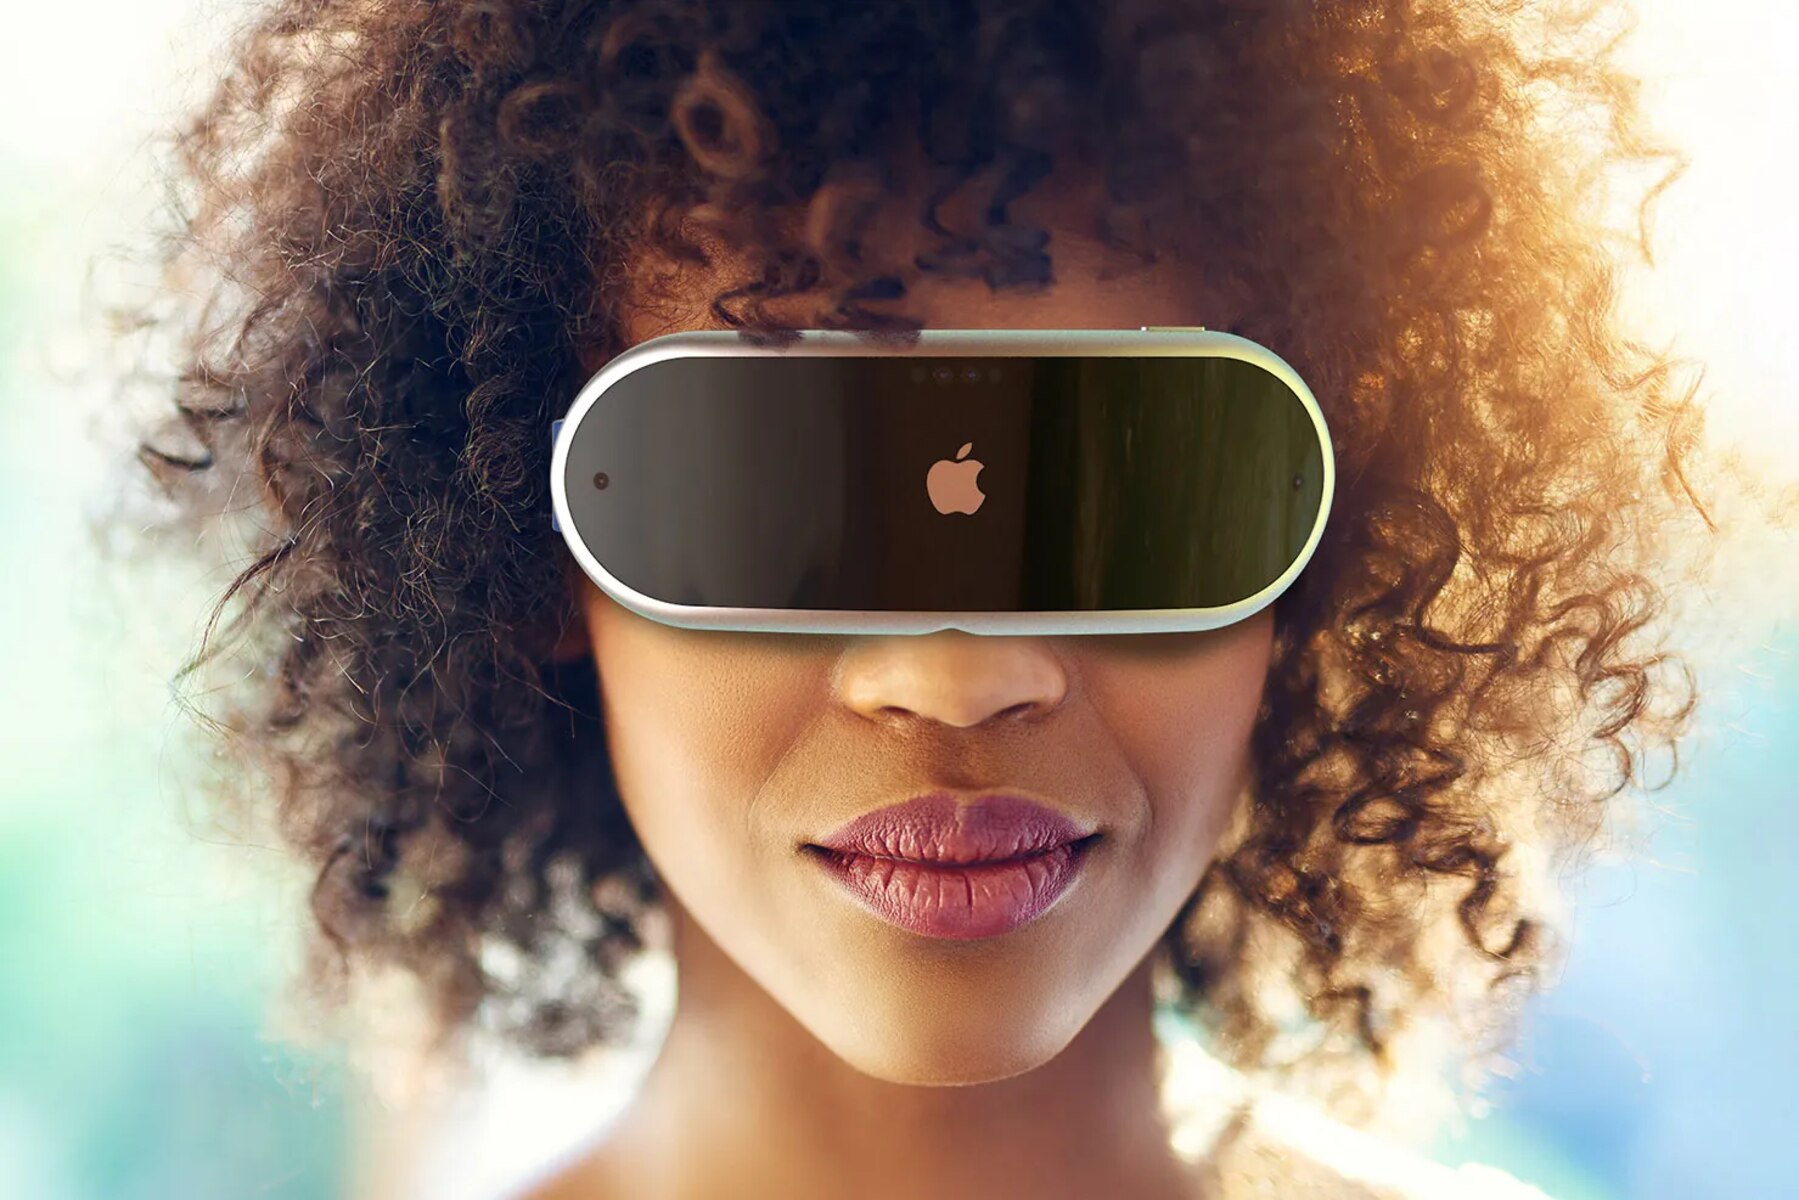 When Will Apple Release VR Headset